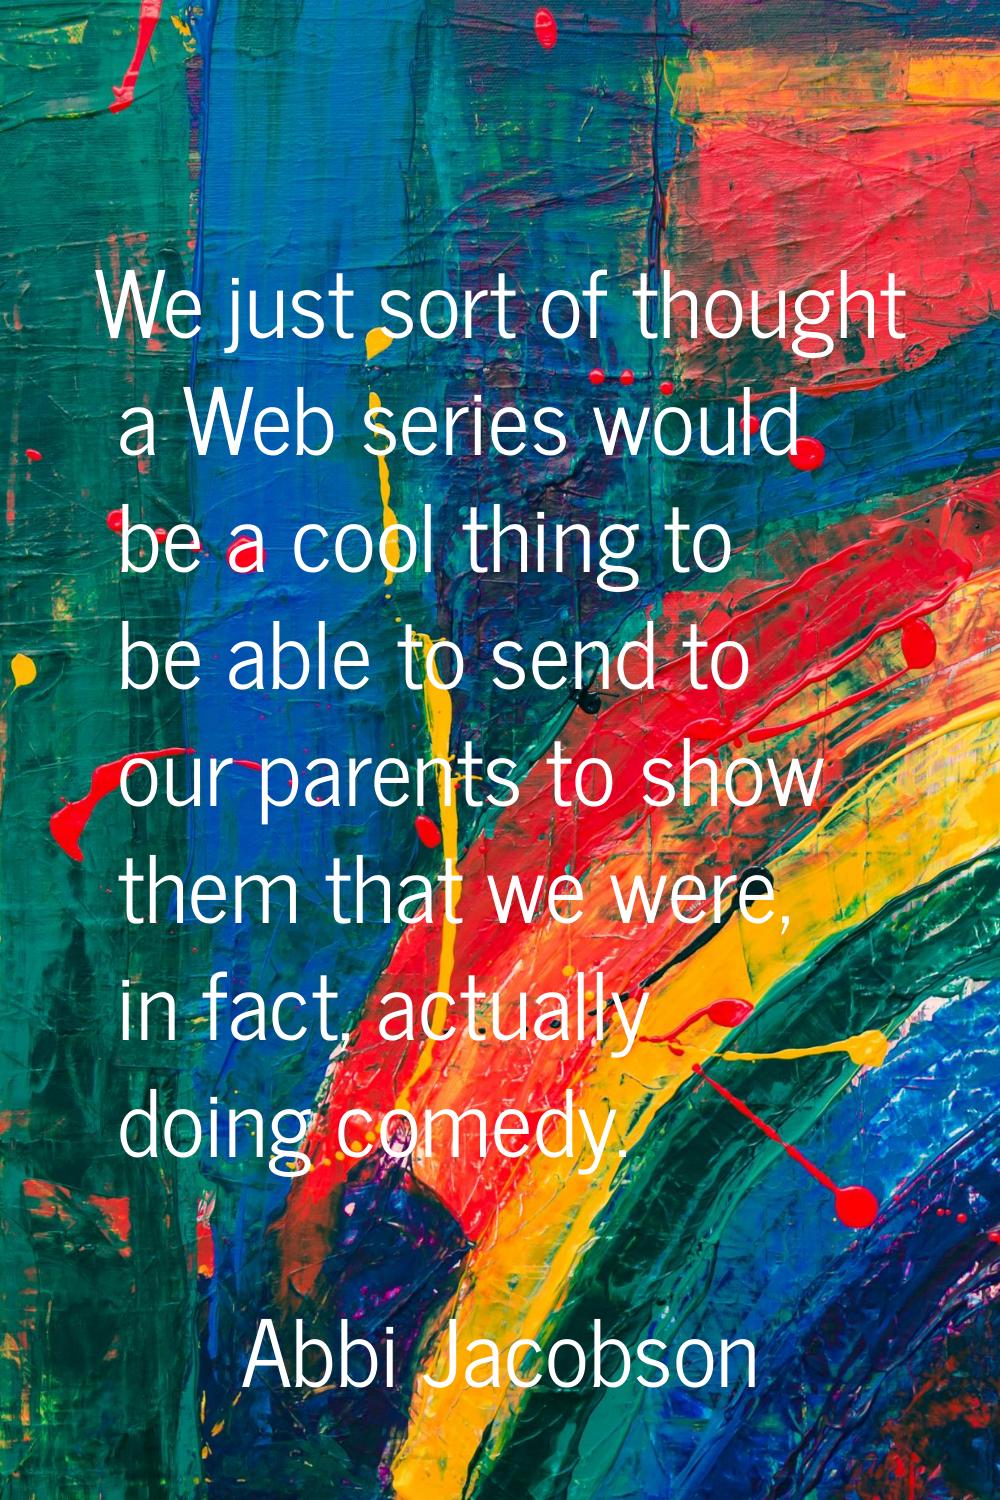 We just sort of thought a Web series would be a cool thing to be able to send to our parents to sho